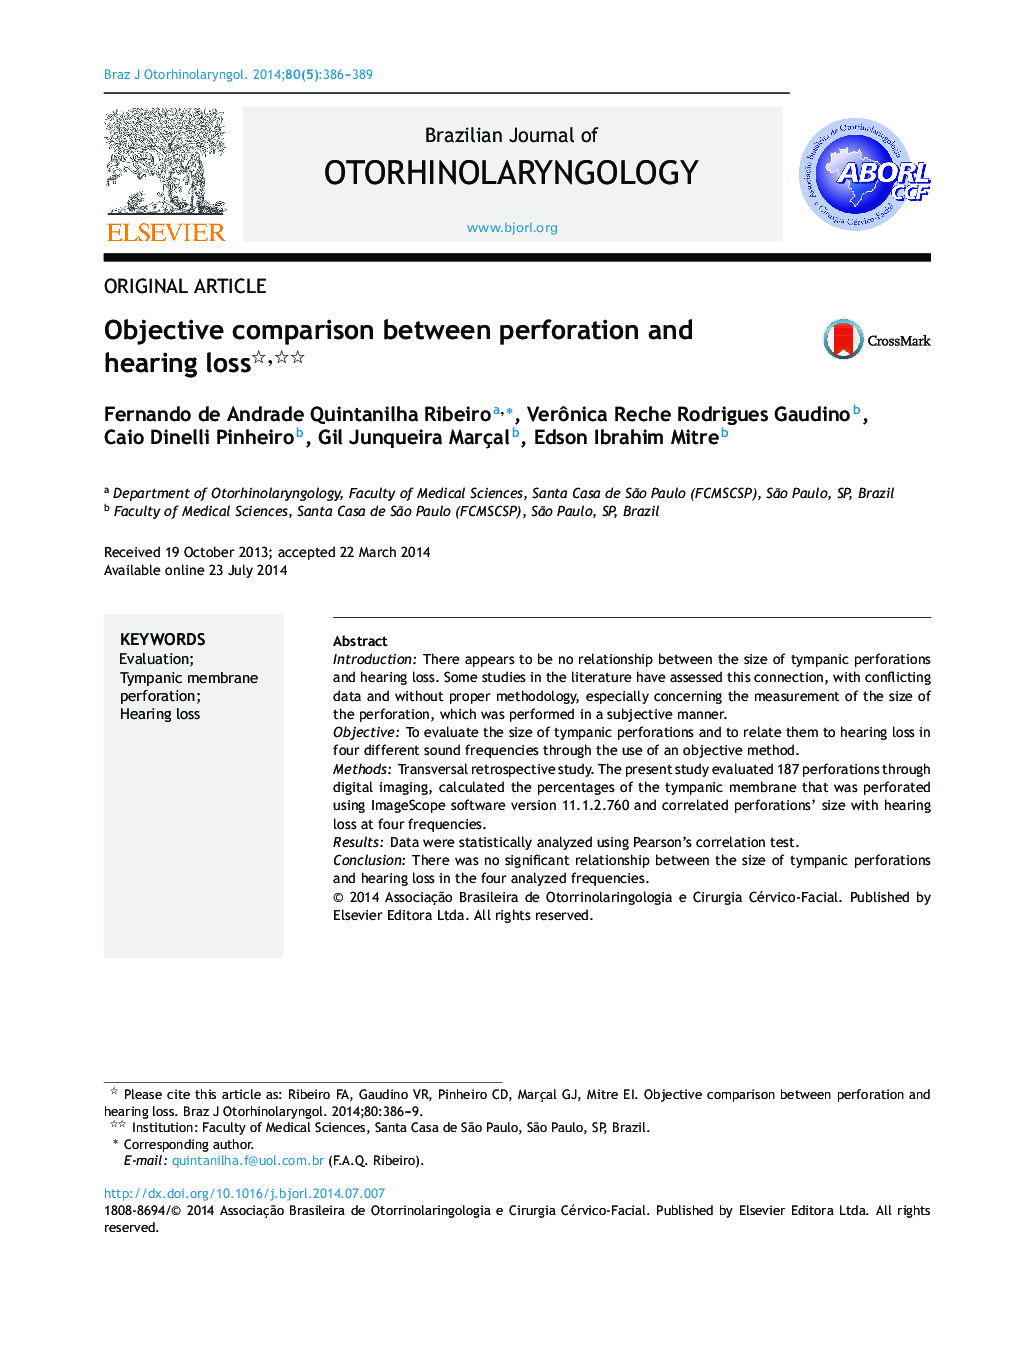 Objective comparison between perforation and hearing loss 